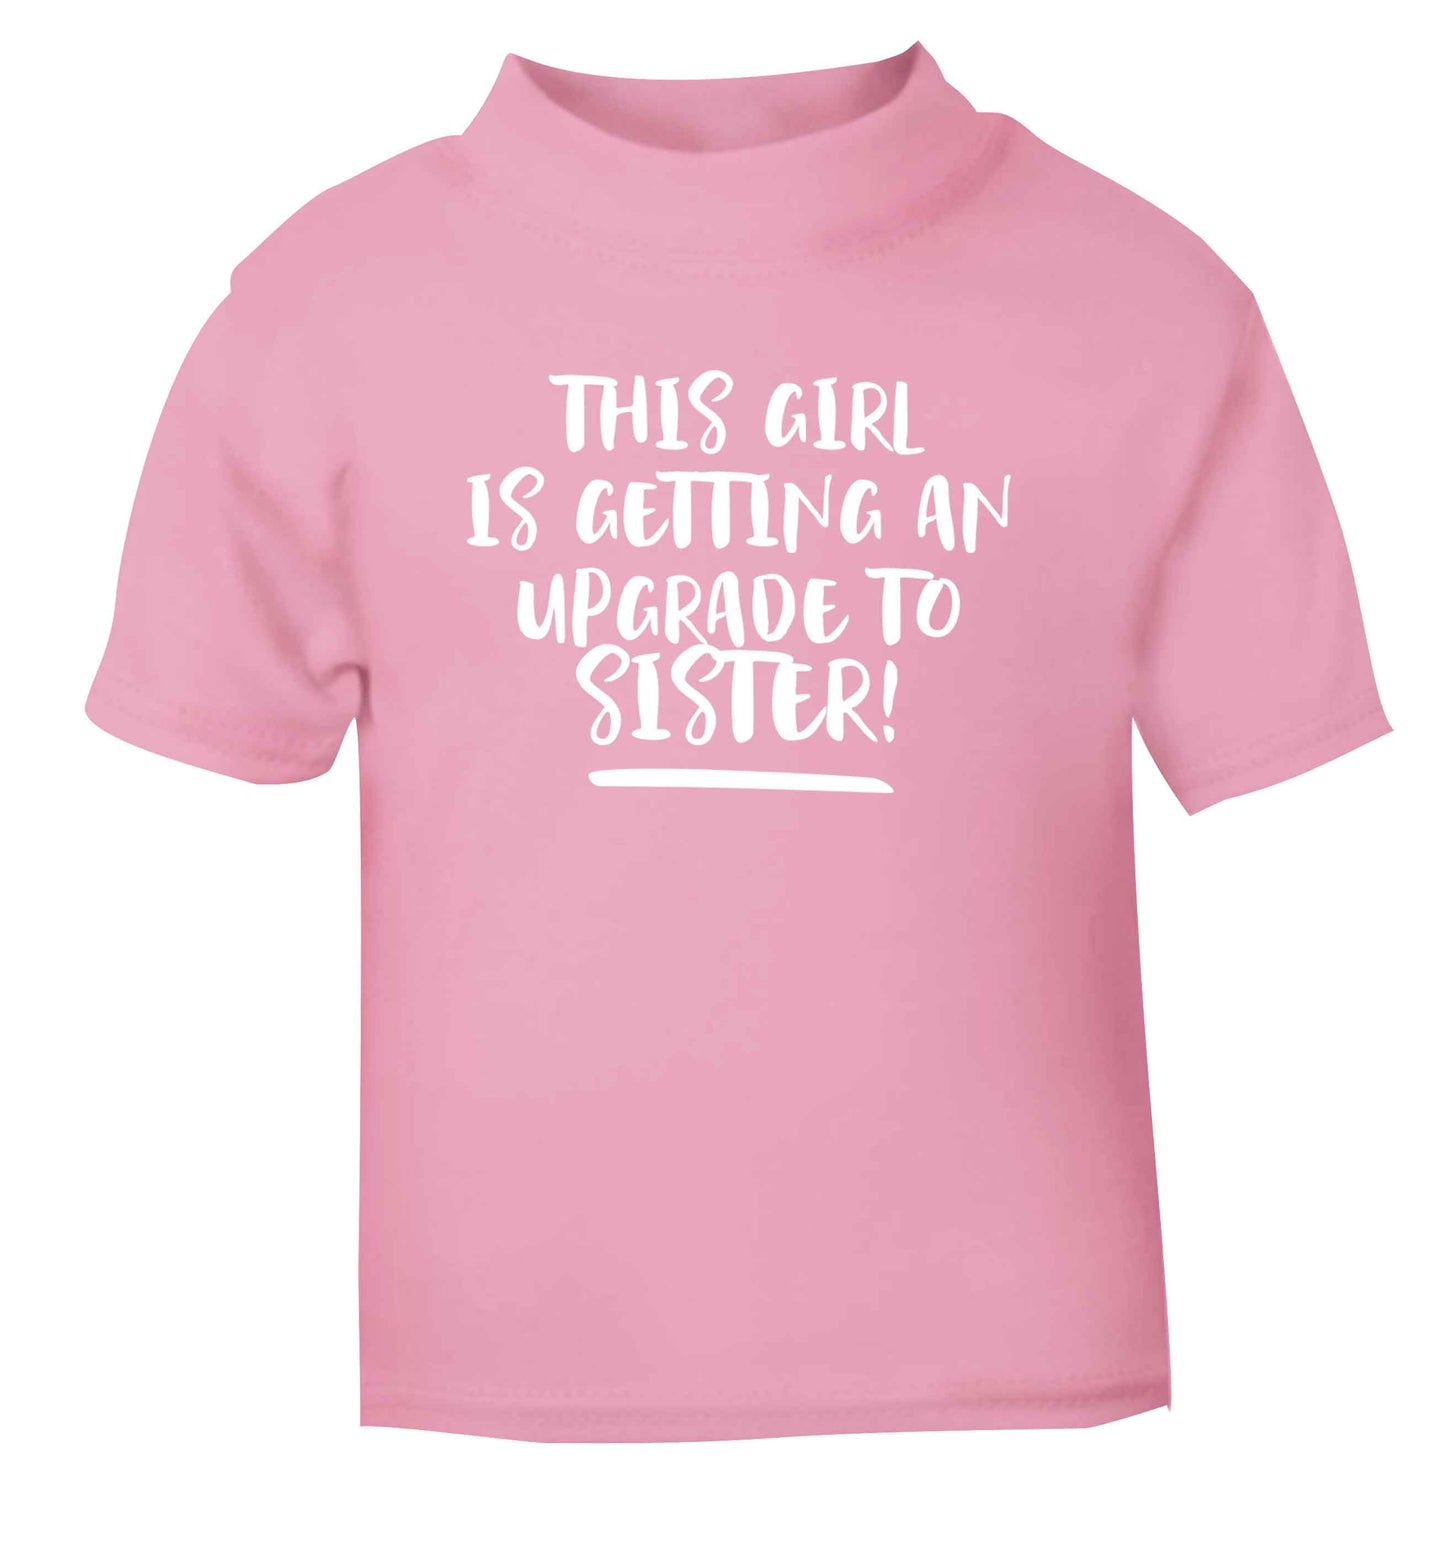 This girl is getting an upgrade to sister! light pink Baby Toddler Tshirt 2 Years